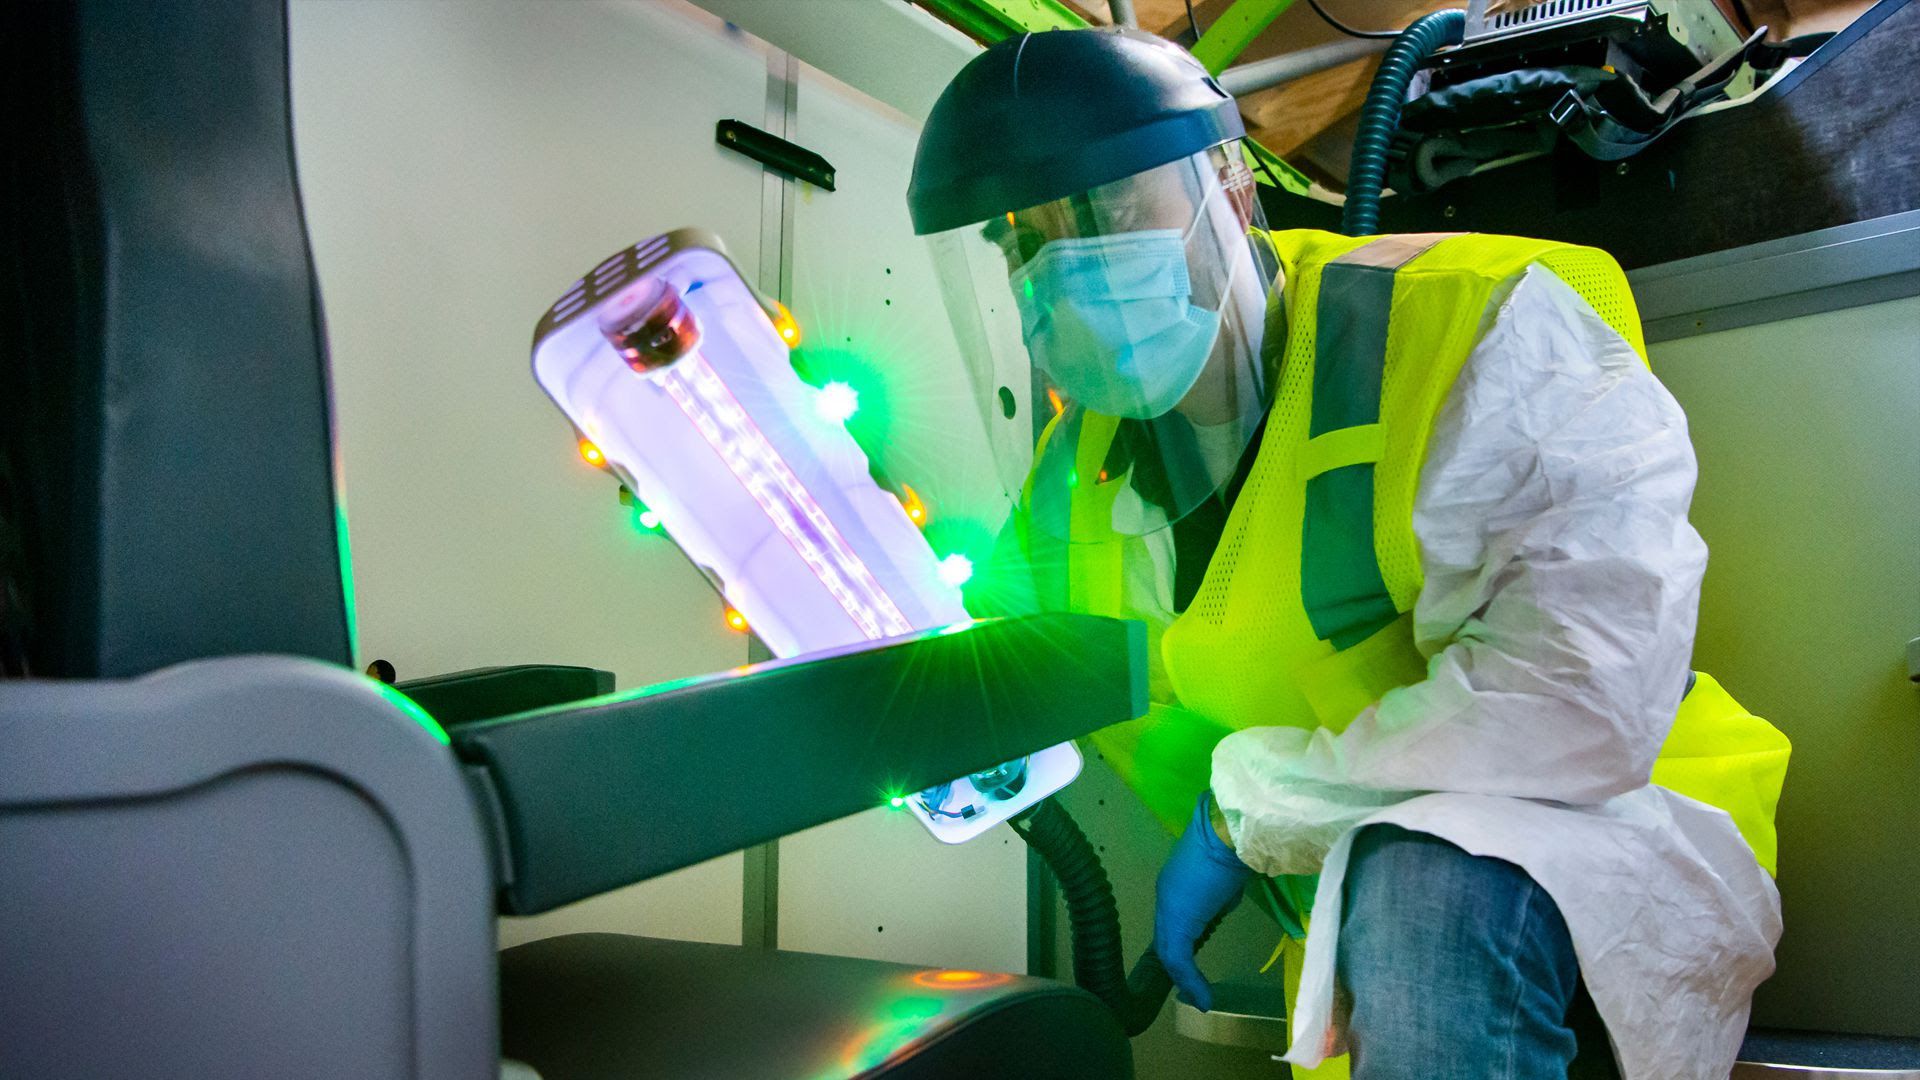 Boeing's UV wand can disinfect high-touch surfaces. Photo: Boeing